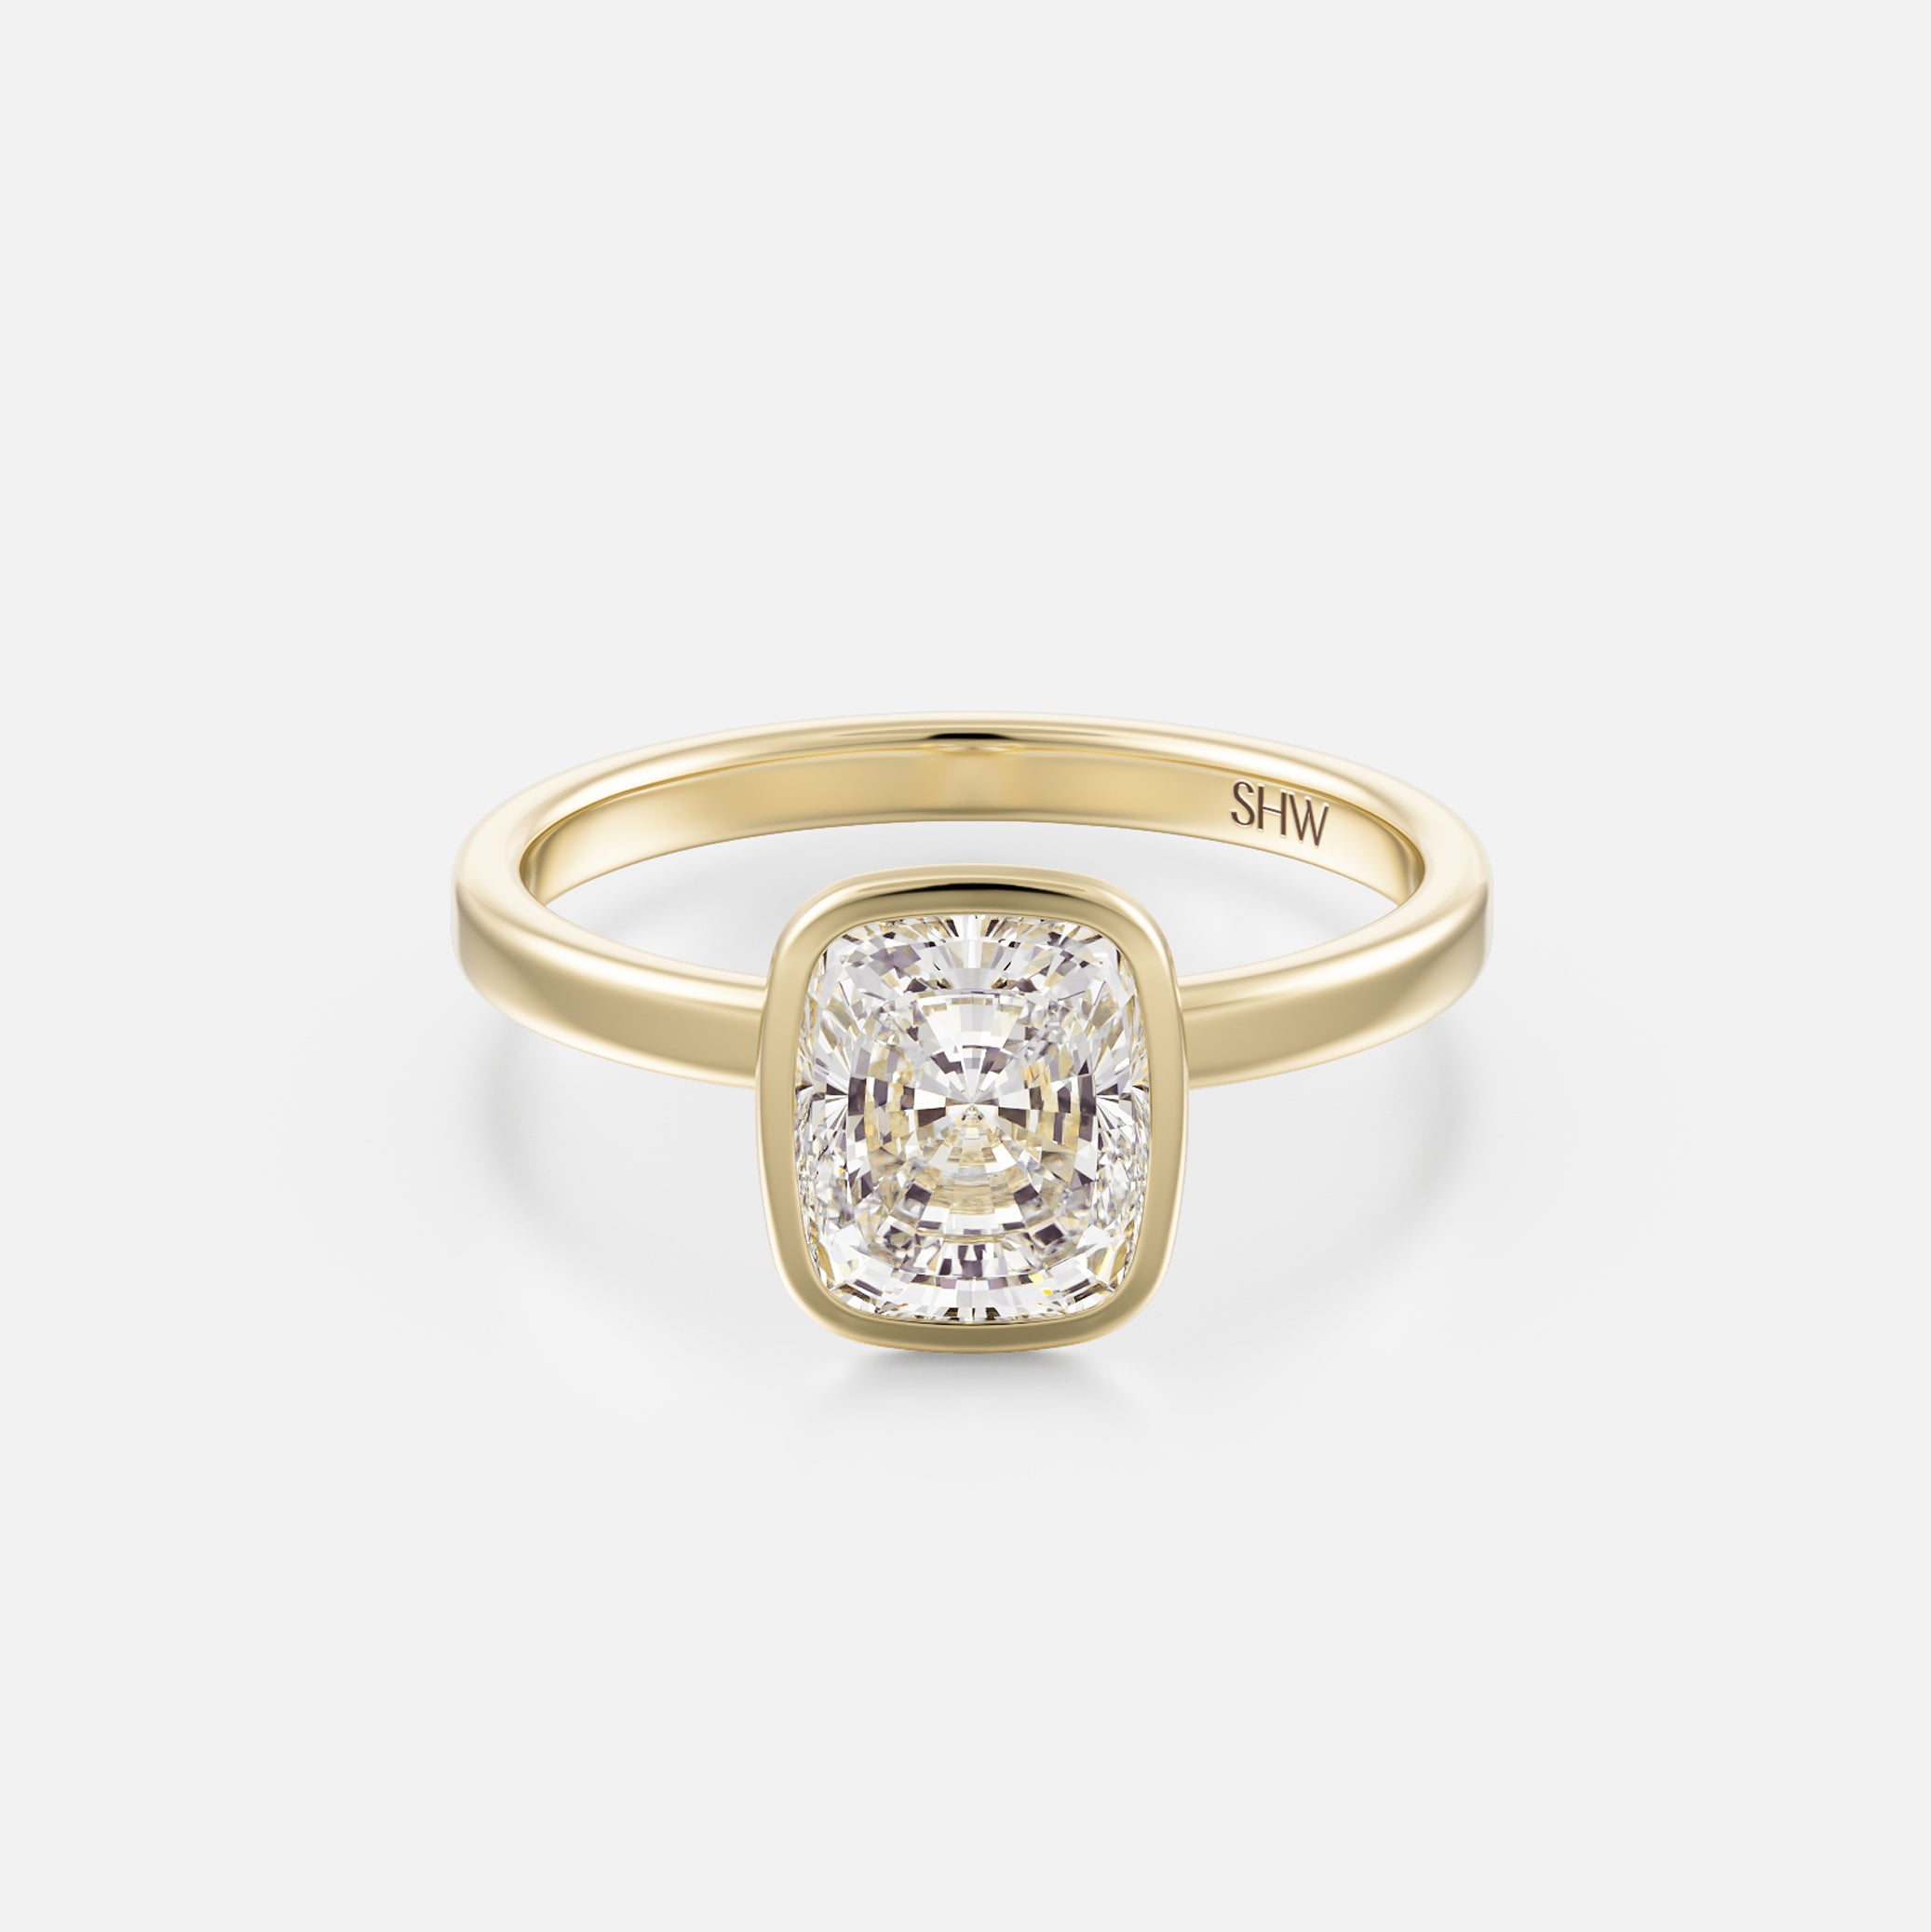 Mana Square Band with Cushion Simple Engagement Ring Setting in 14k Gold or platinum by SHW Fine Jewelry NYC